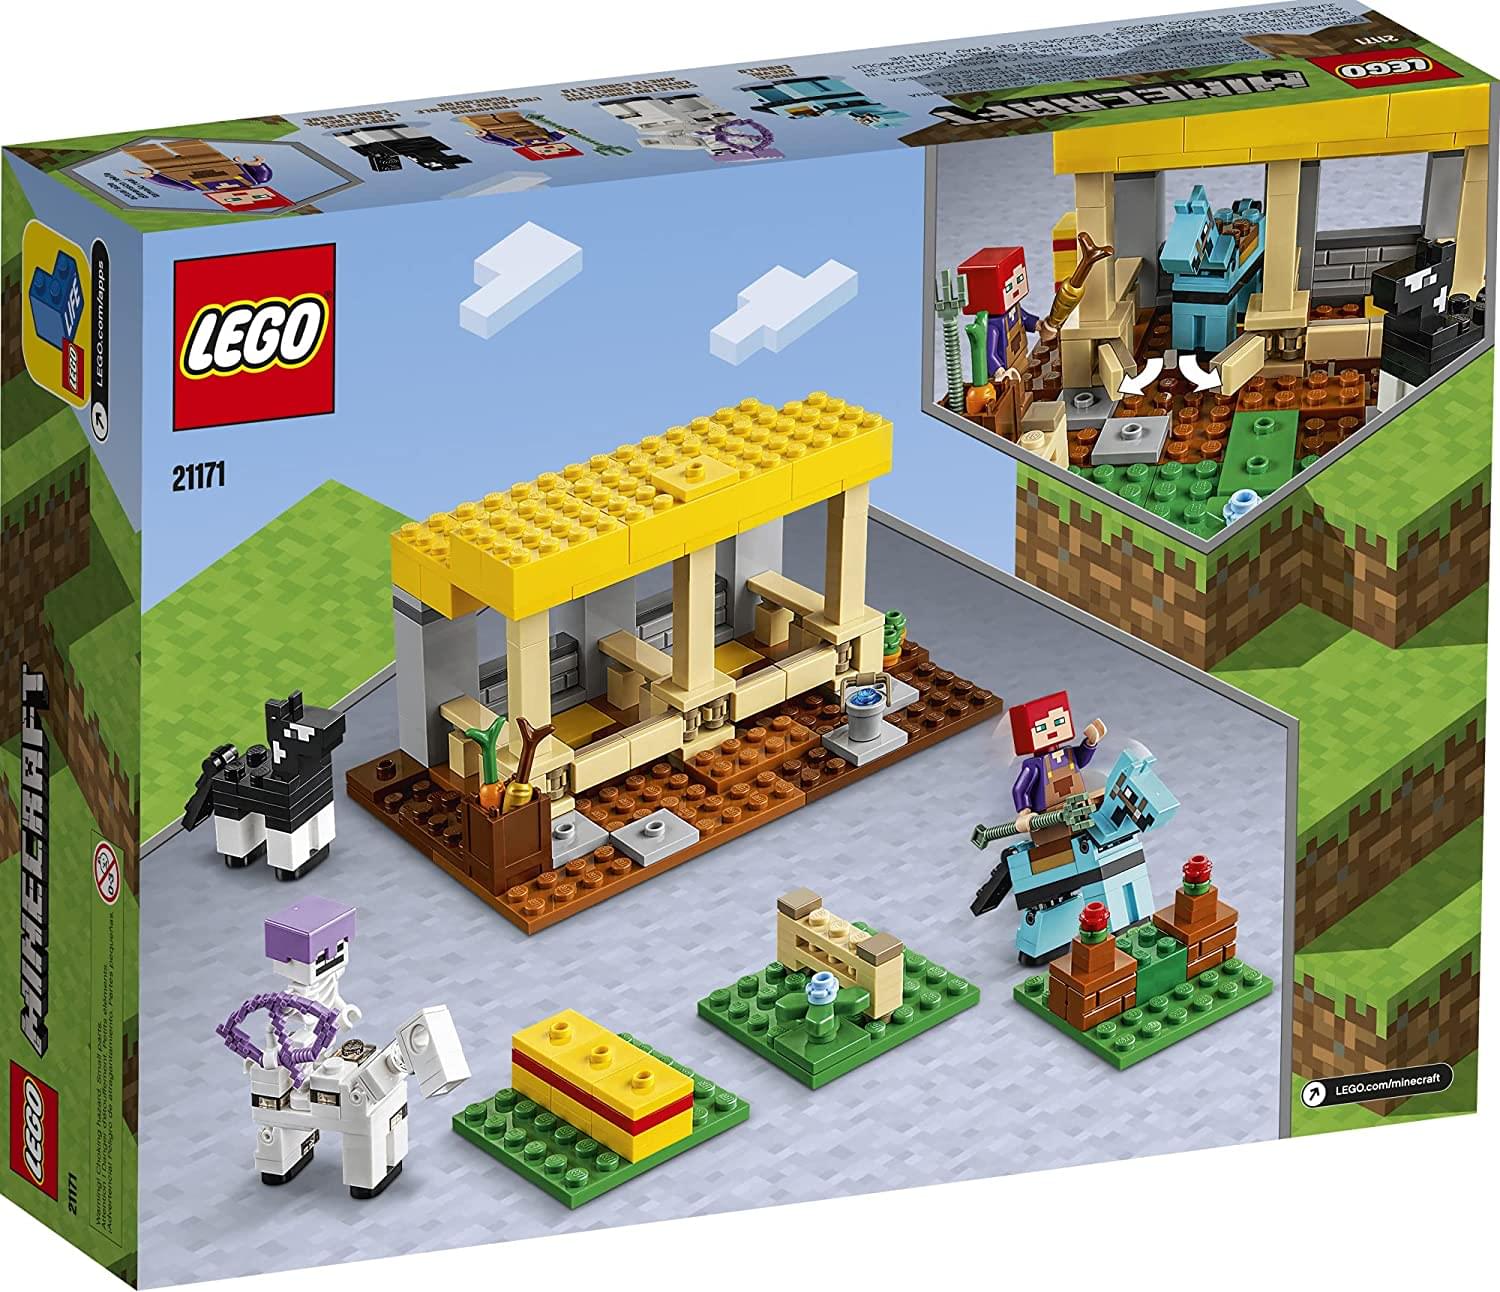 LEGO Minecraft 21171 The Horse Stable 241 Piece Building Kit